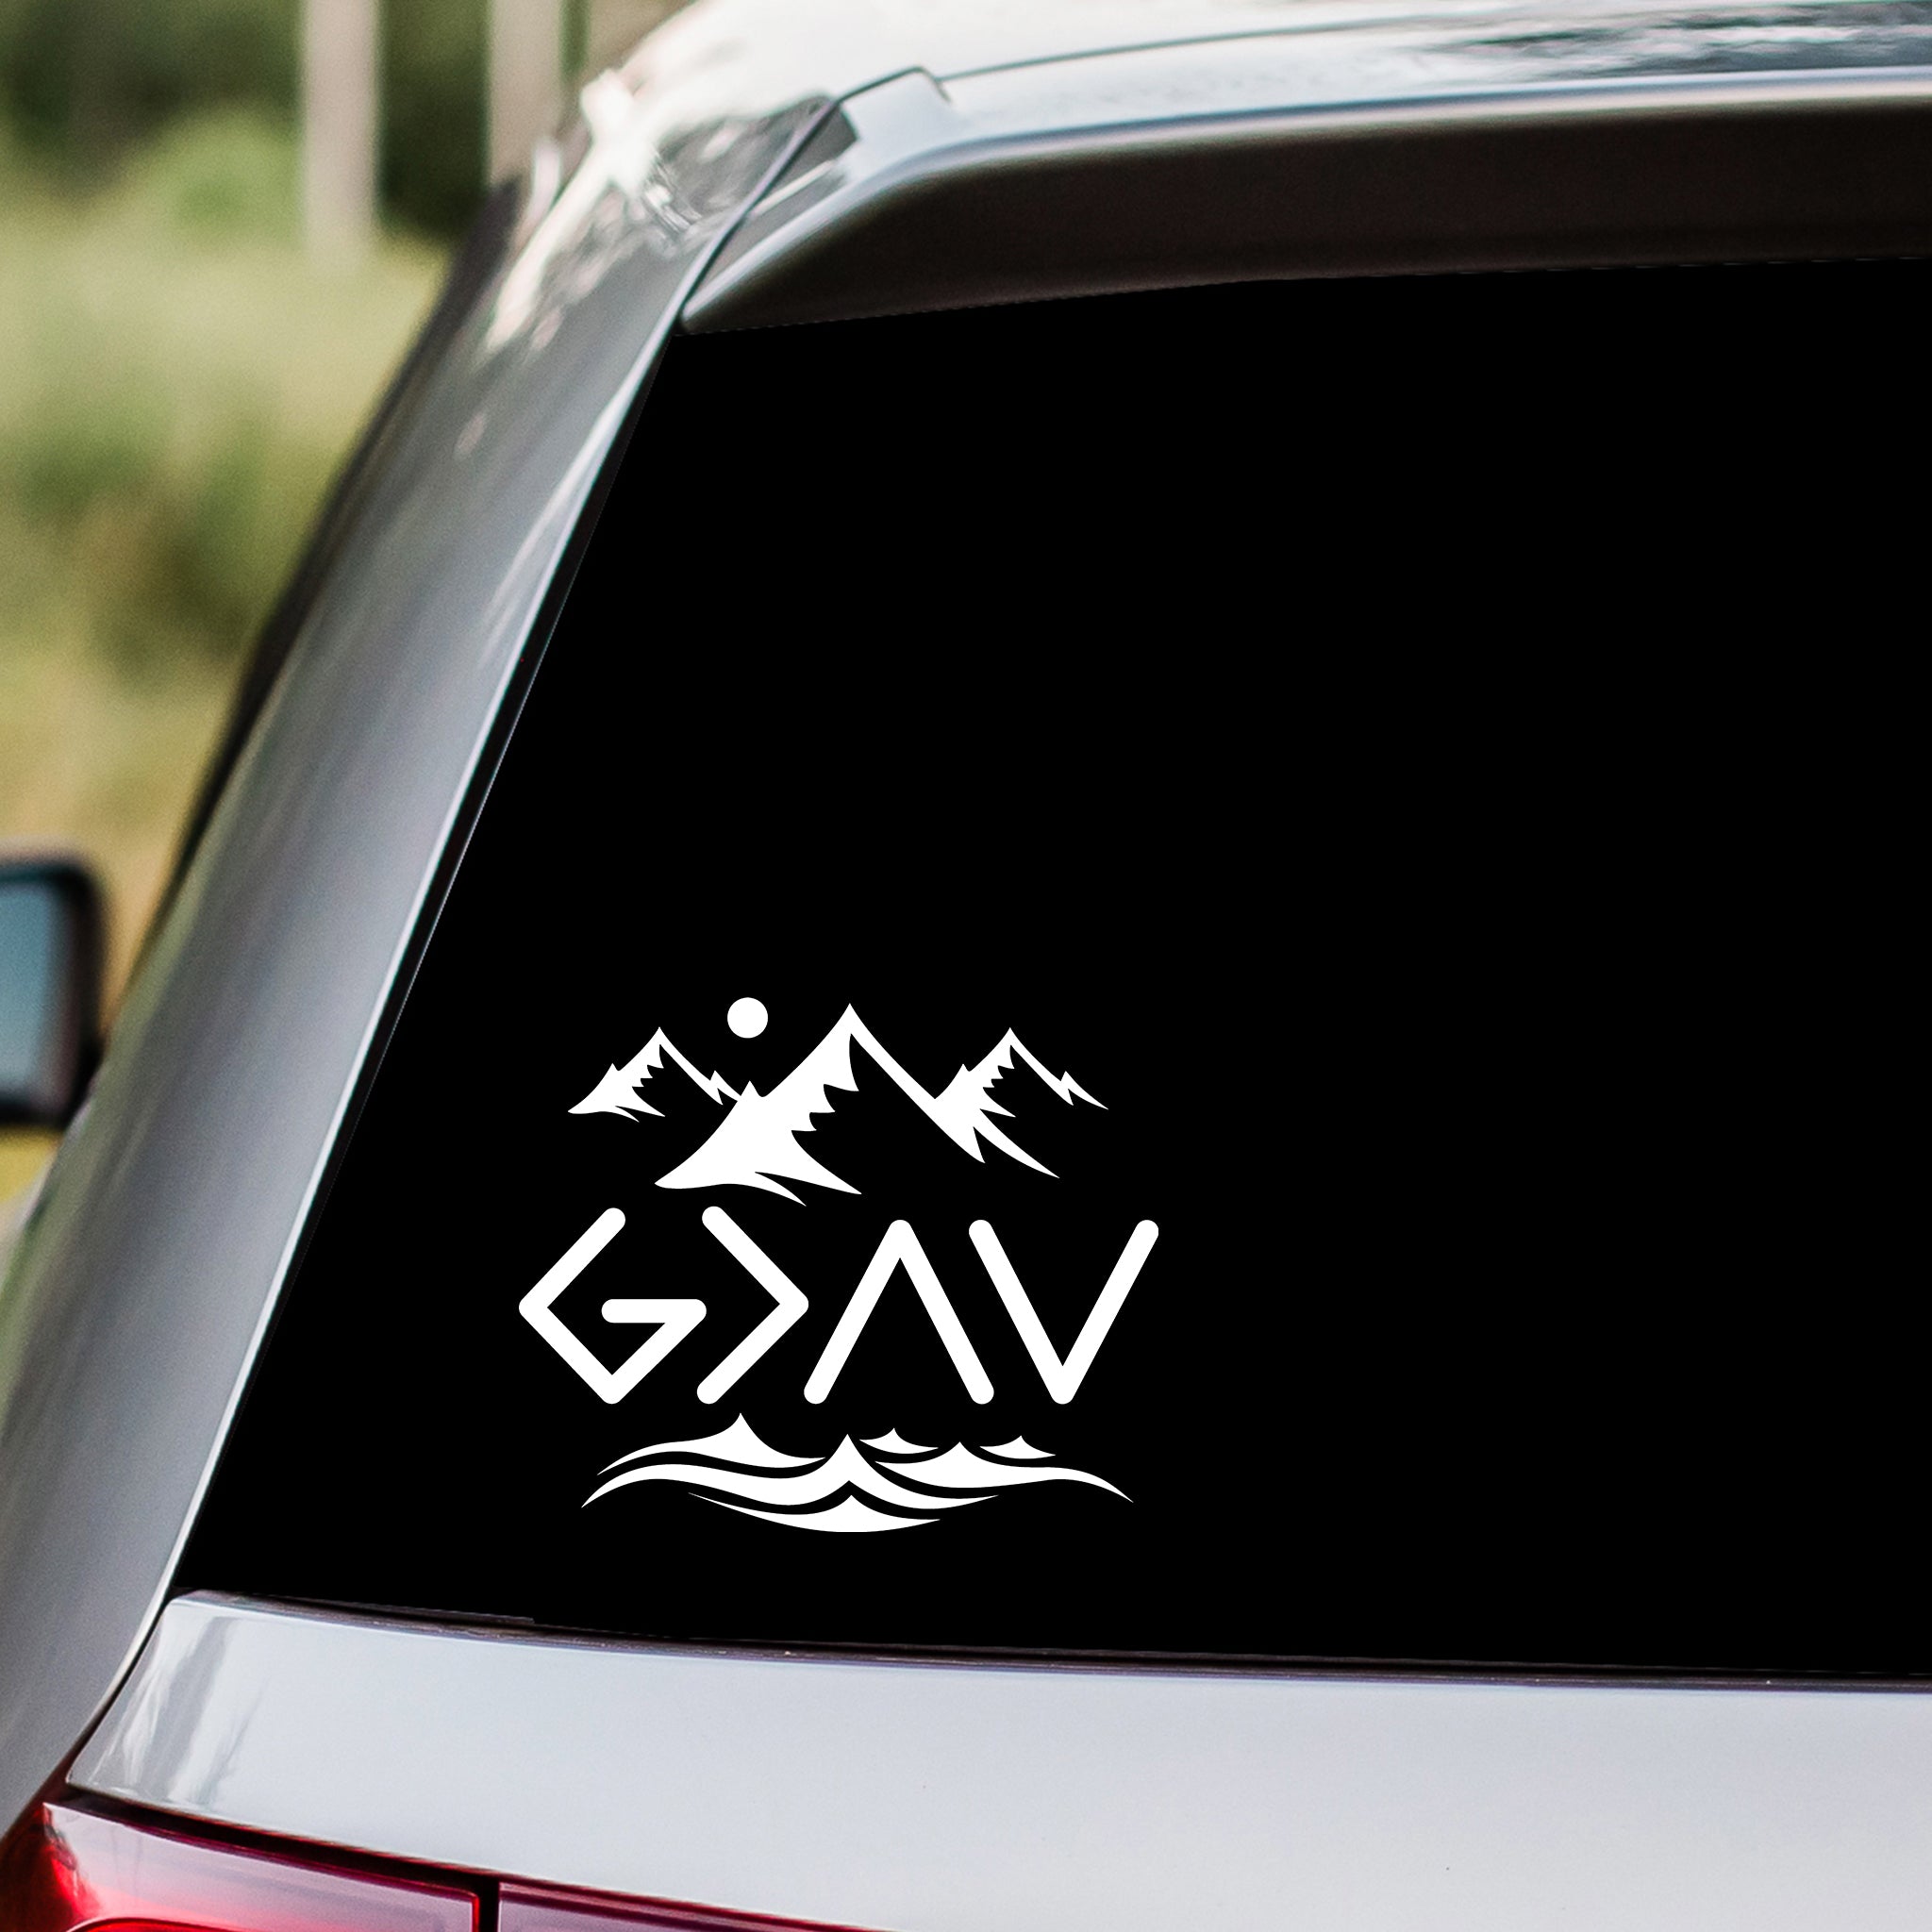 Greater than mountains and valleys Decal